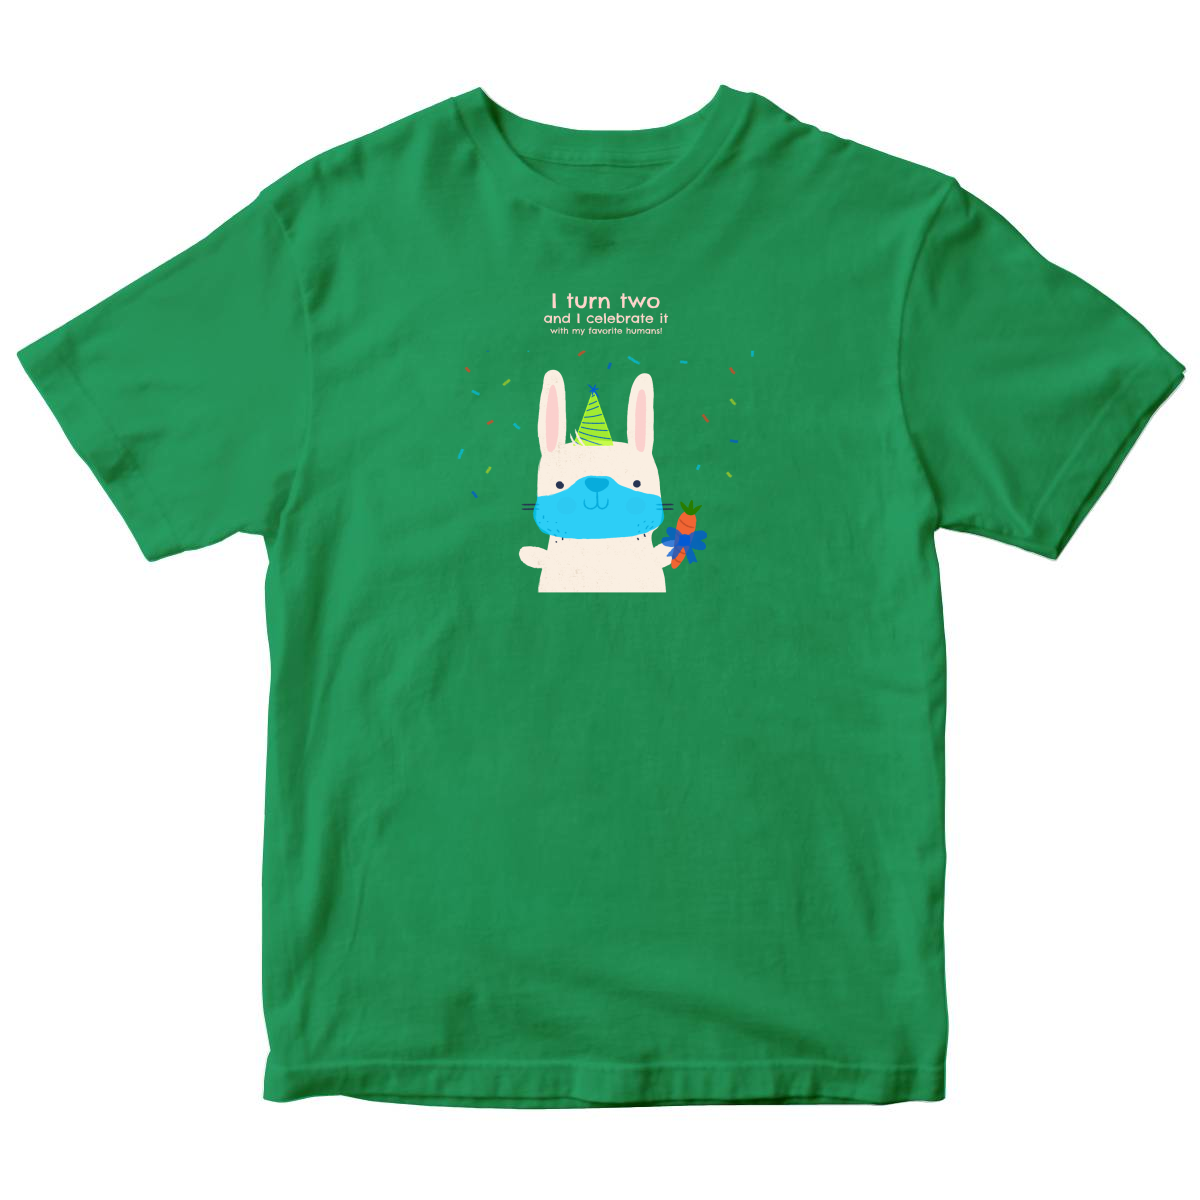 I turn two and I celebrate it with my favorite humans  Toddler T-shirt | Green